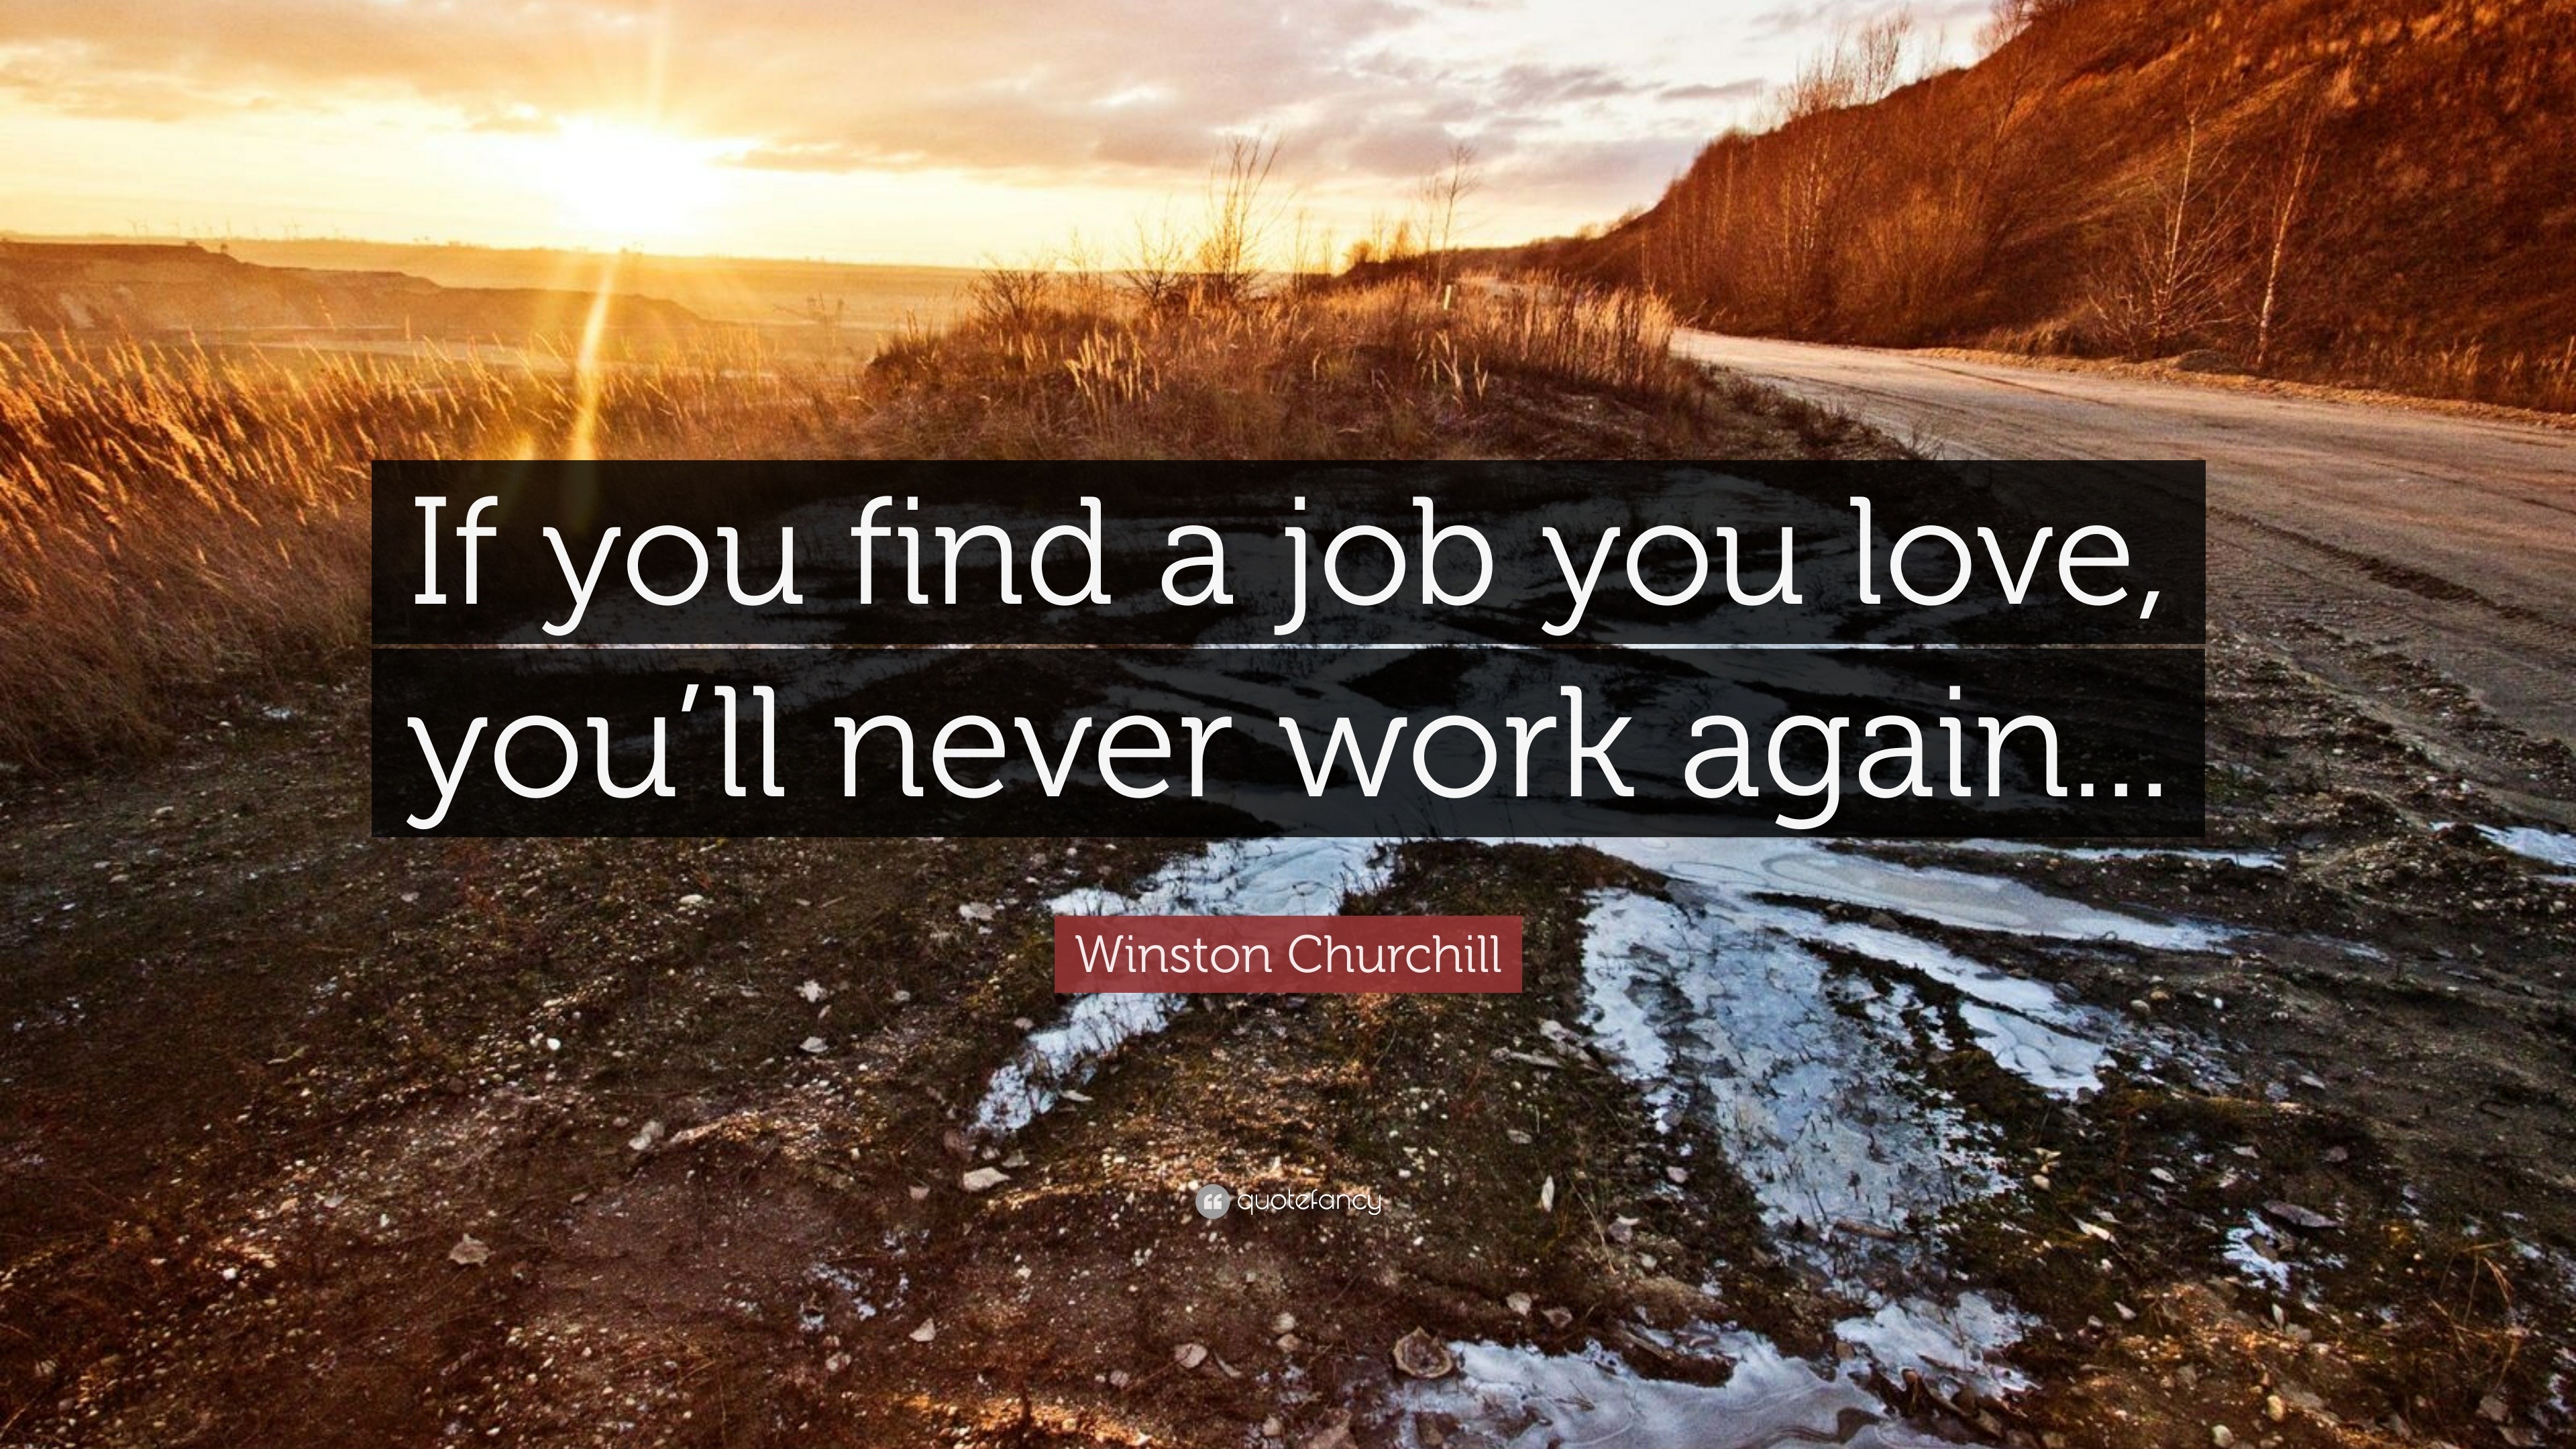 Winston Churchill Quote If you find a job you love you ll